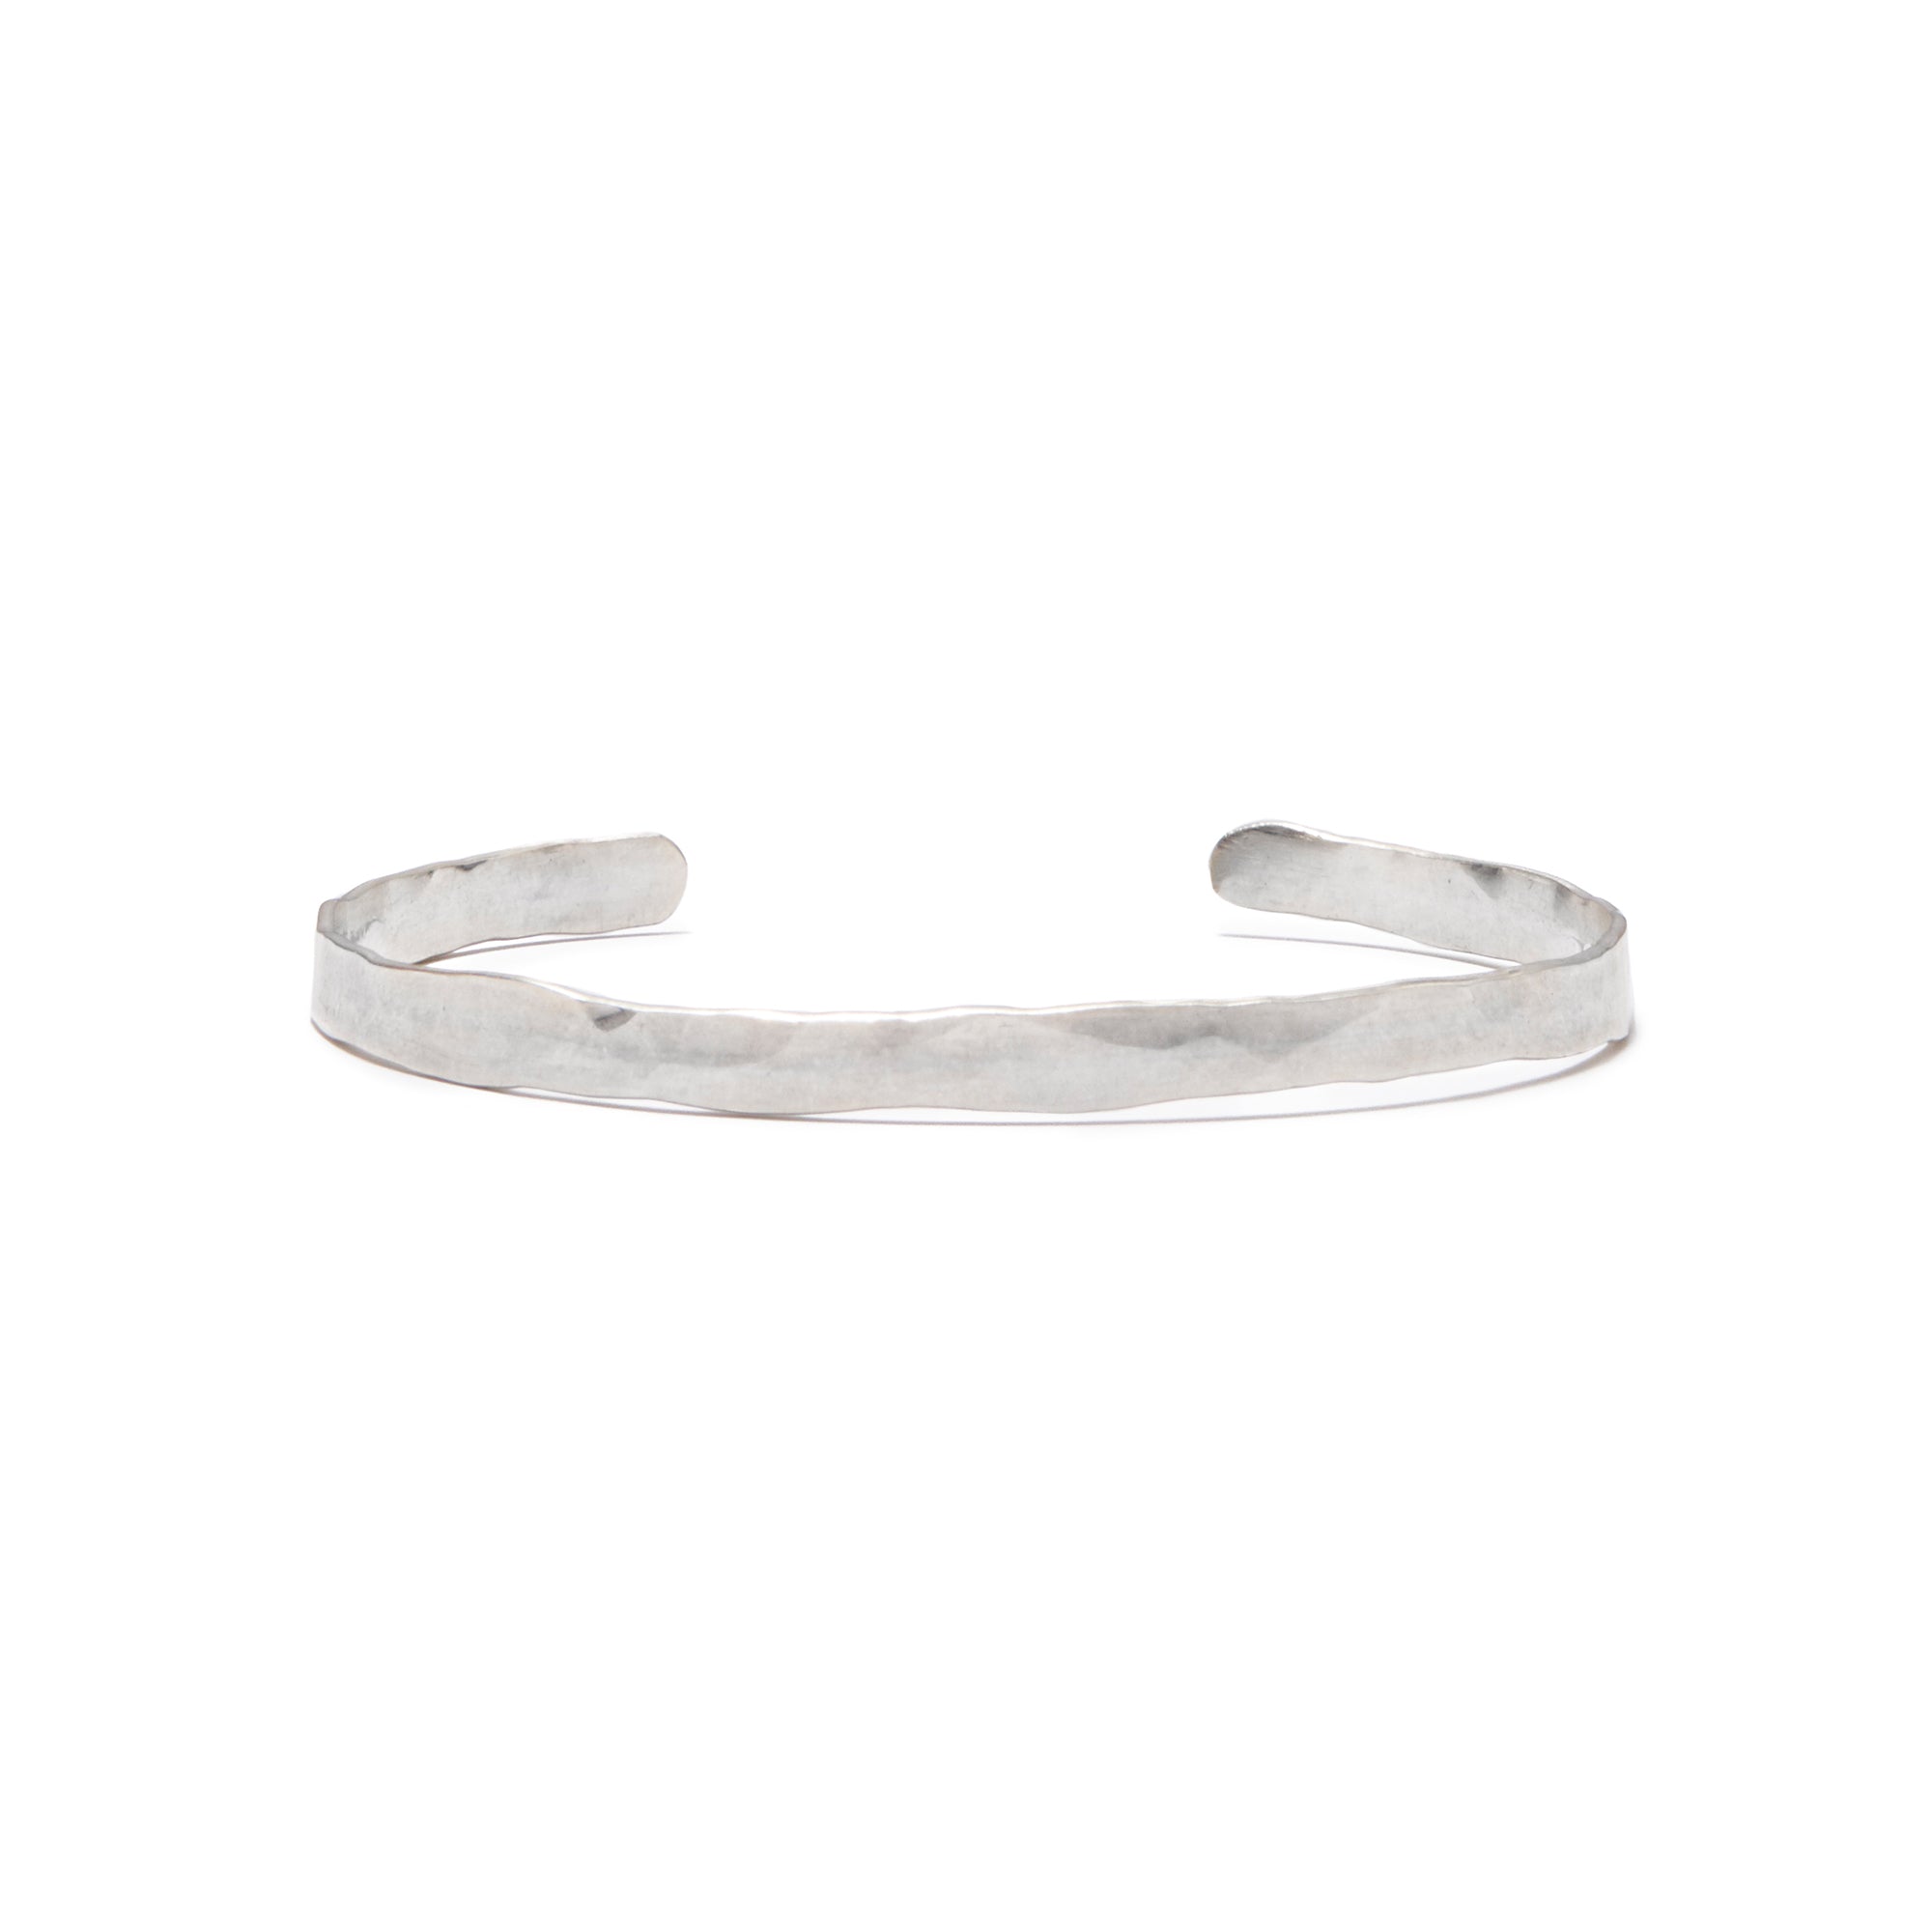 The Mazzo Cuff from the Sorda Collection is a simple forged bracelet with a heavy hammered texture. 